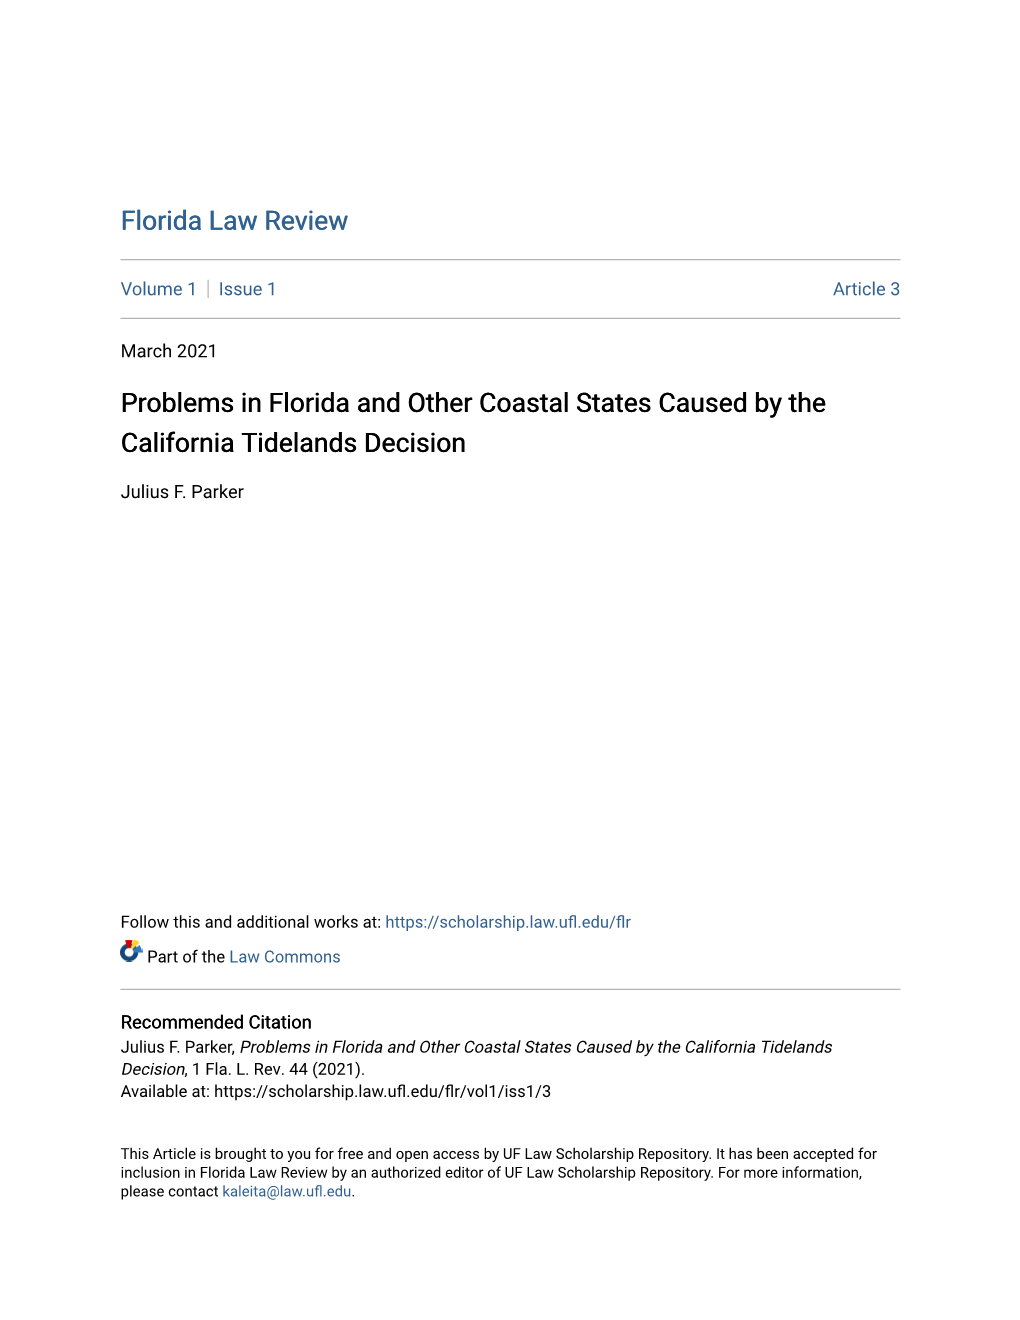 Problems in Florida and Other Coastal States Caused by the California Tidelands Decision